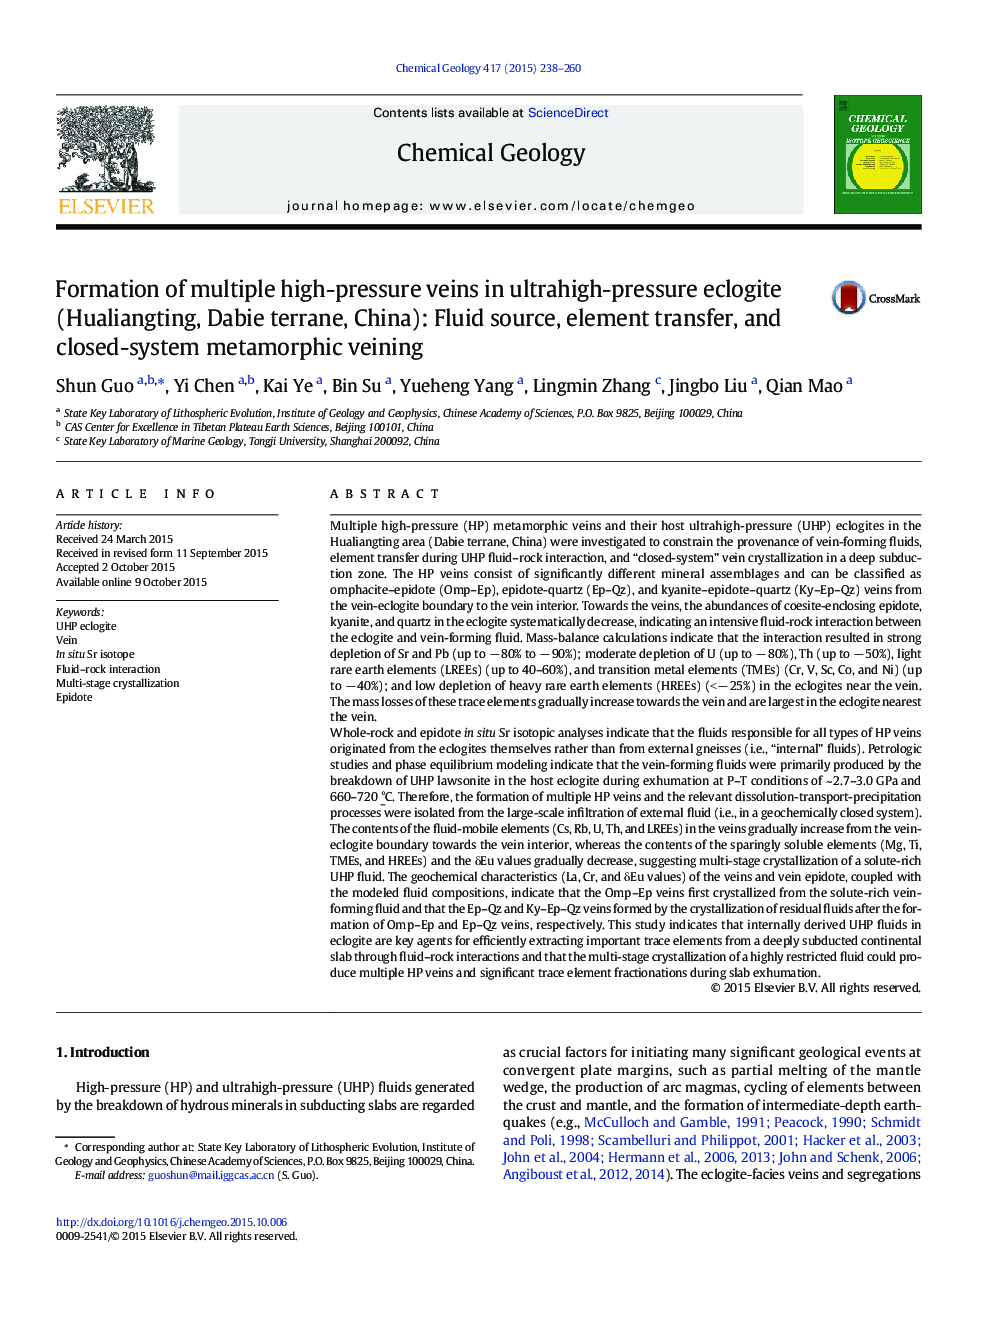 Formation of multiple high-pressure veins in ultrahigh-pressure eclogite (Hualiangting, Dabie terrane, China): Fluid source, element transfer, and closed-system metamorphic veining